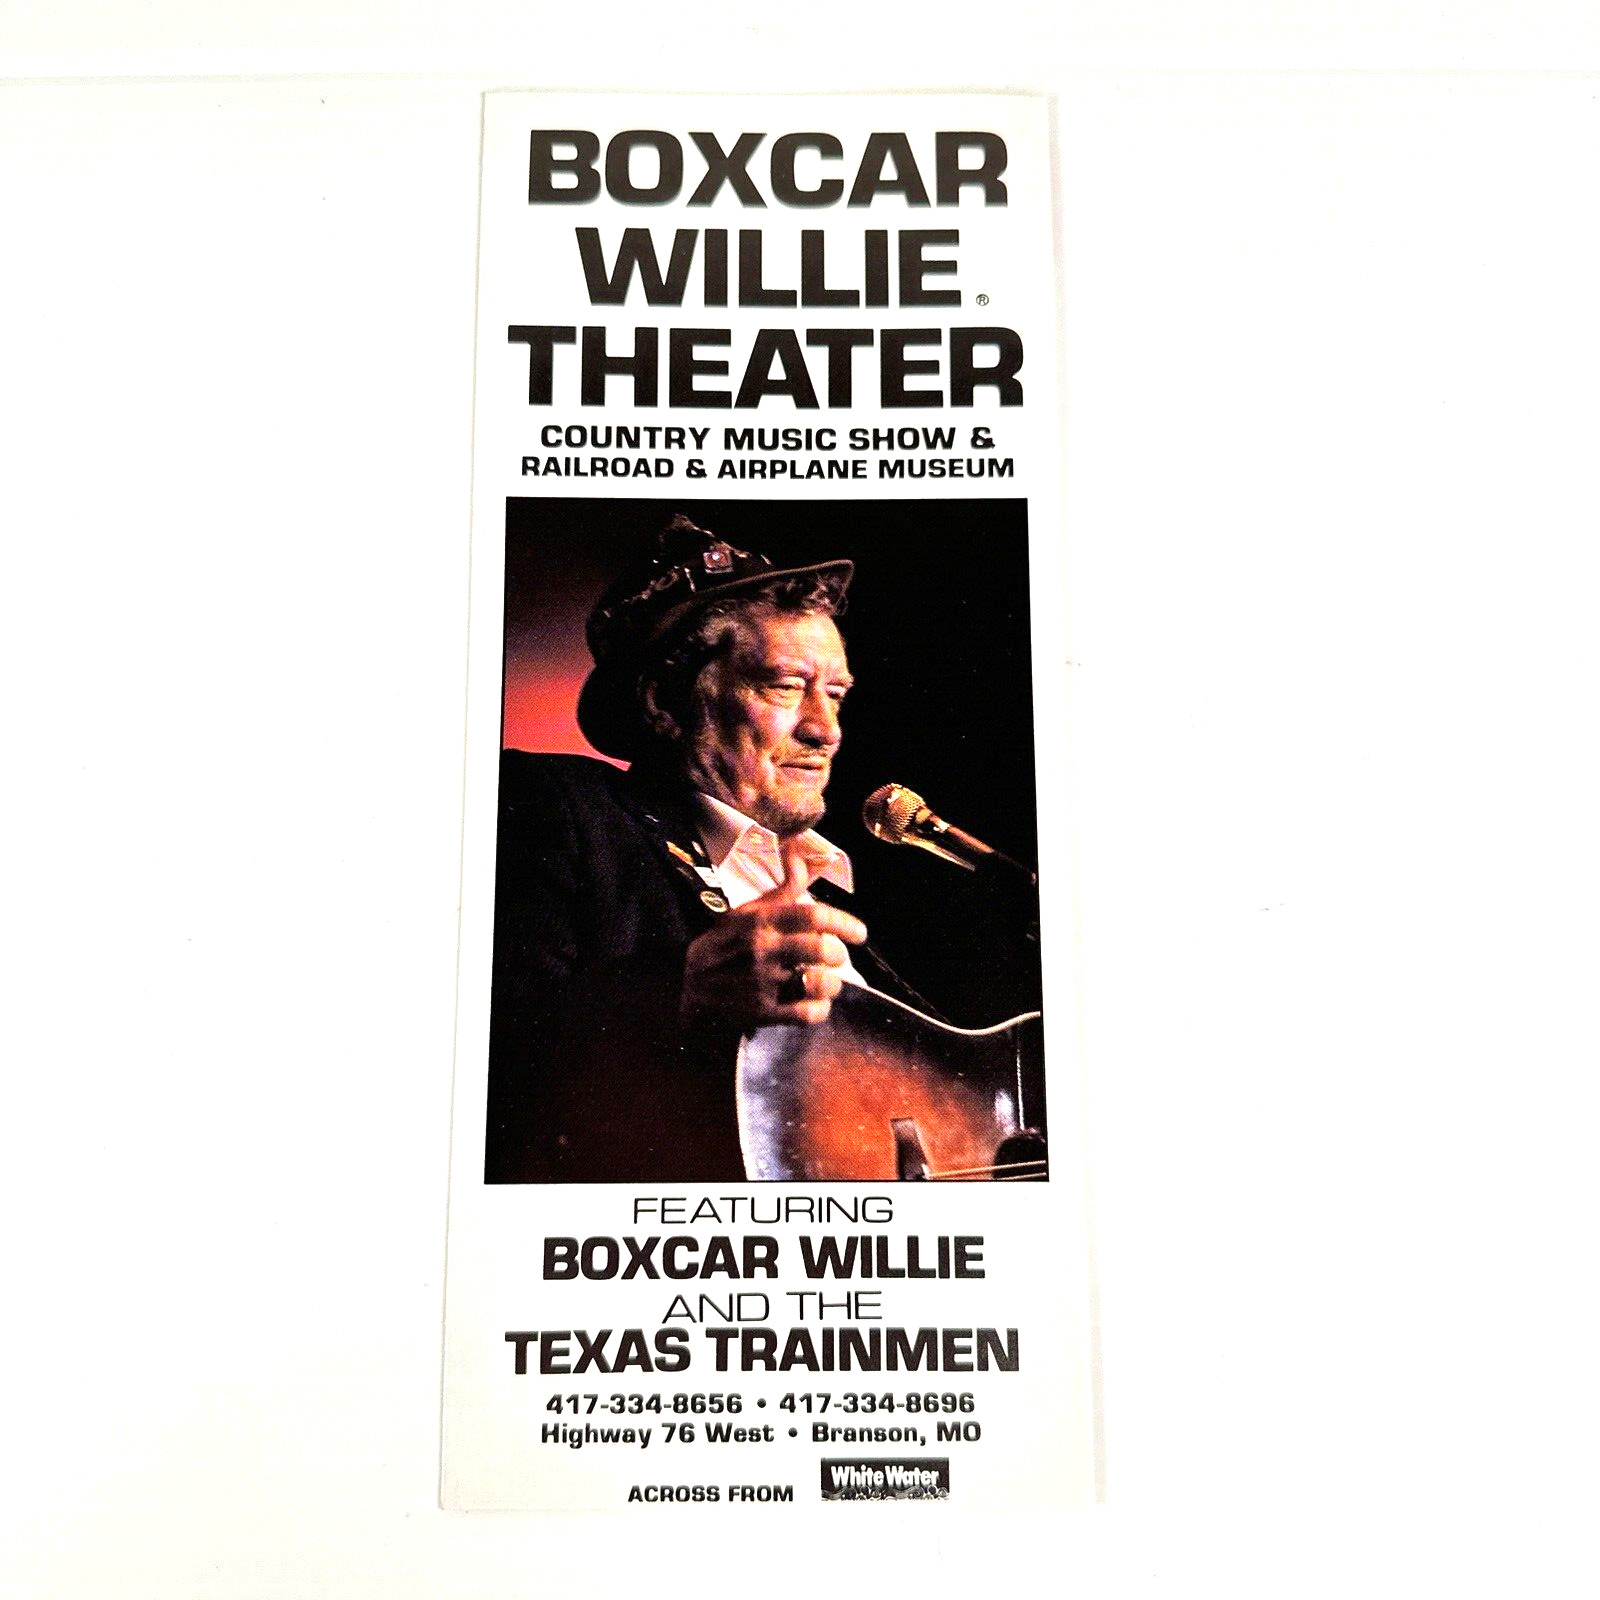 Boxcar Willie Theater + Railroad Airplane Museum Brochure Vtg 1990s Branson MO